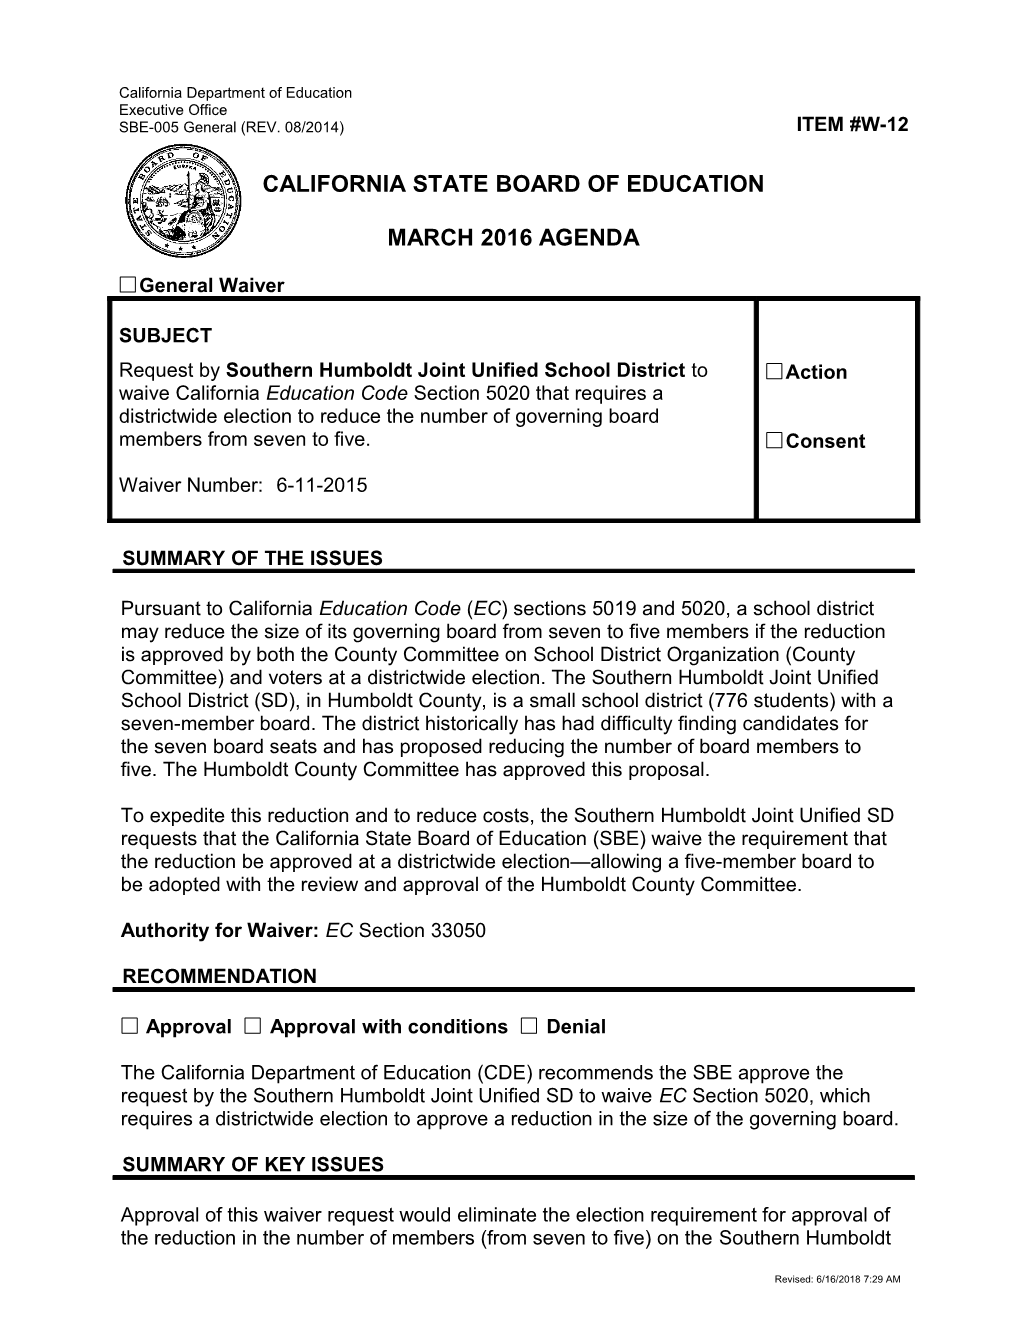 March 2016 Waiver Item W-12 - Meeting Agendas (CA State Board of Education)